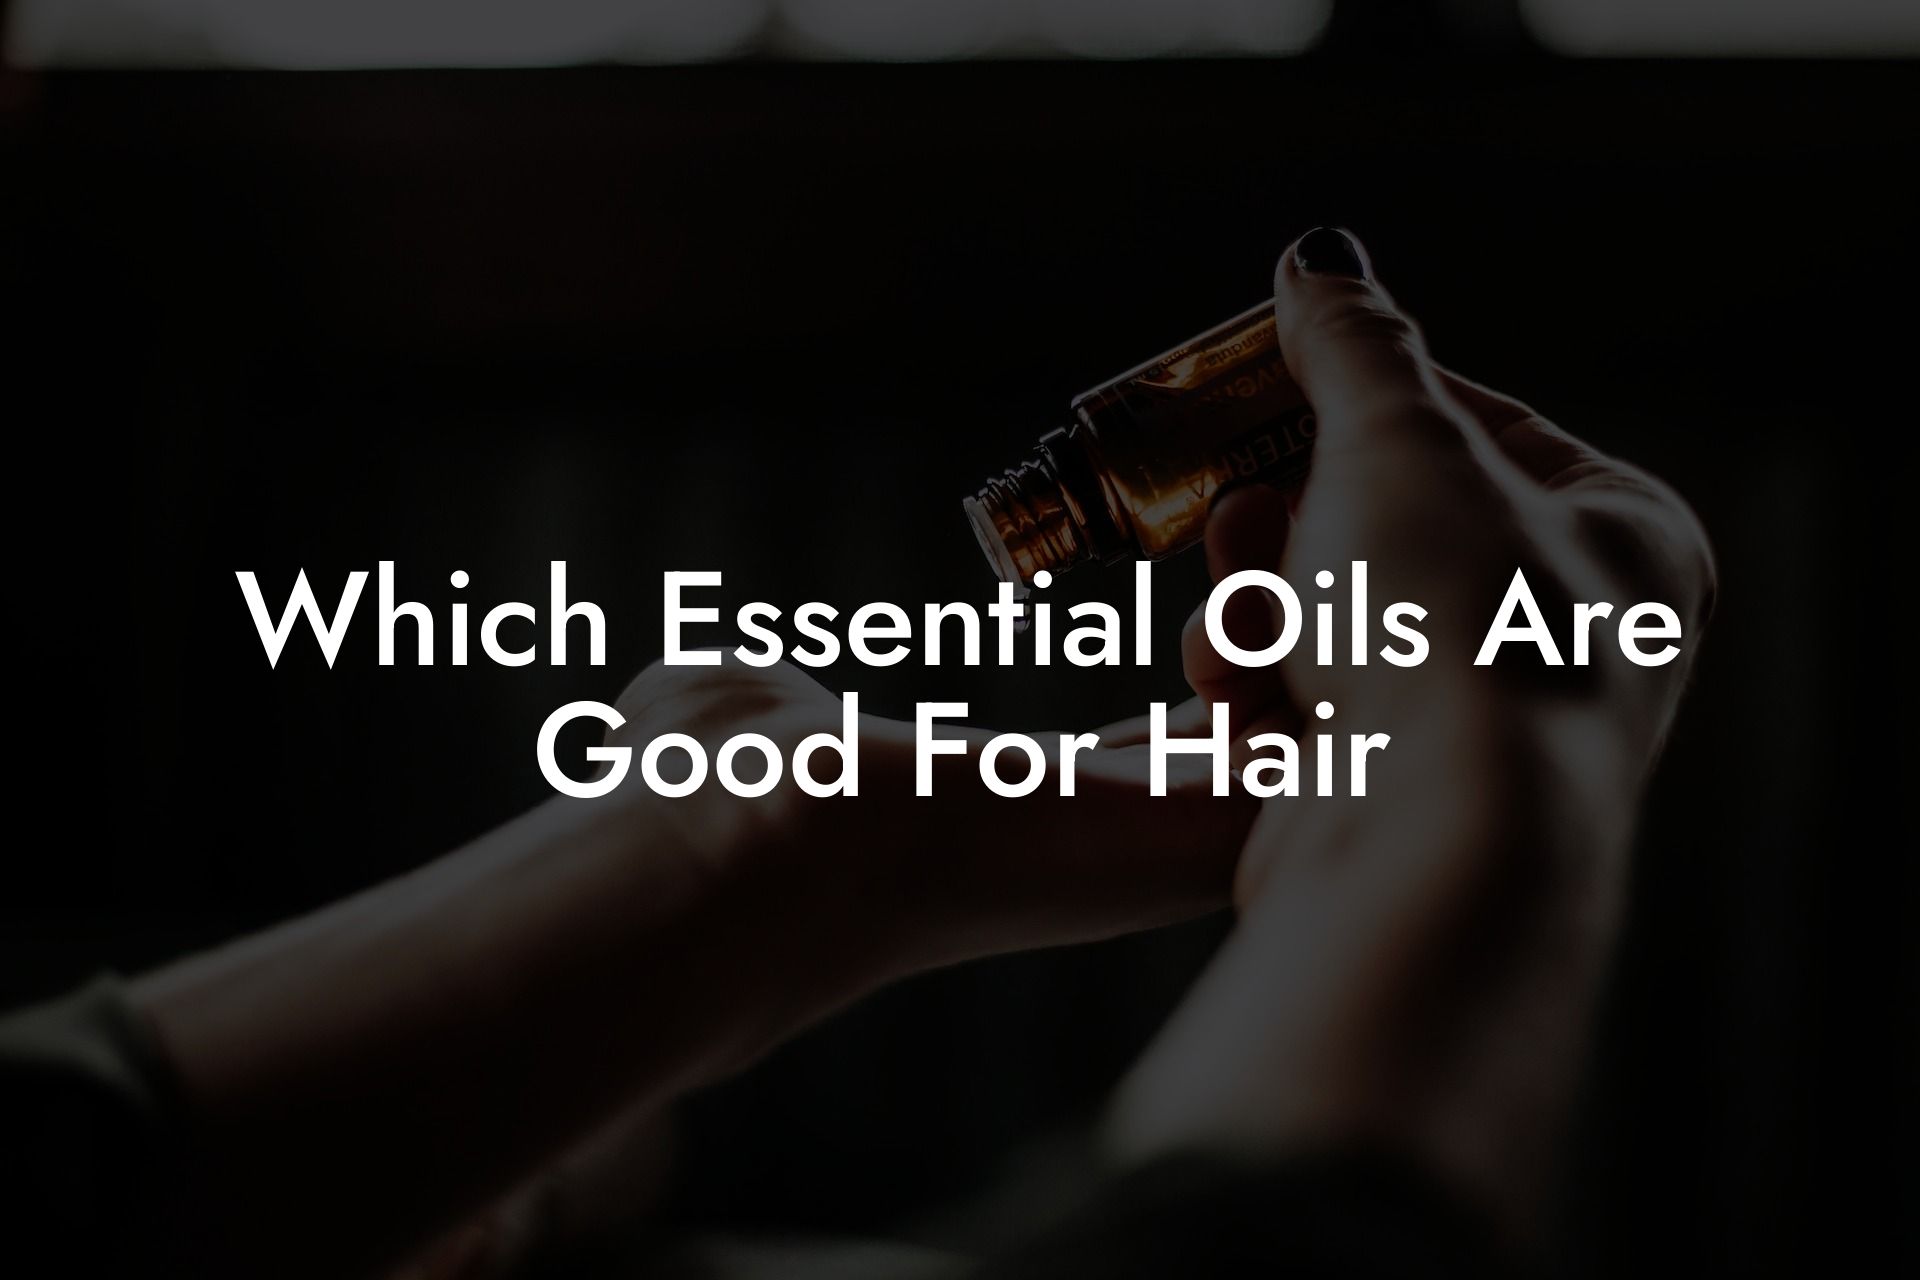 Which Essential Oils Are Good For Hair